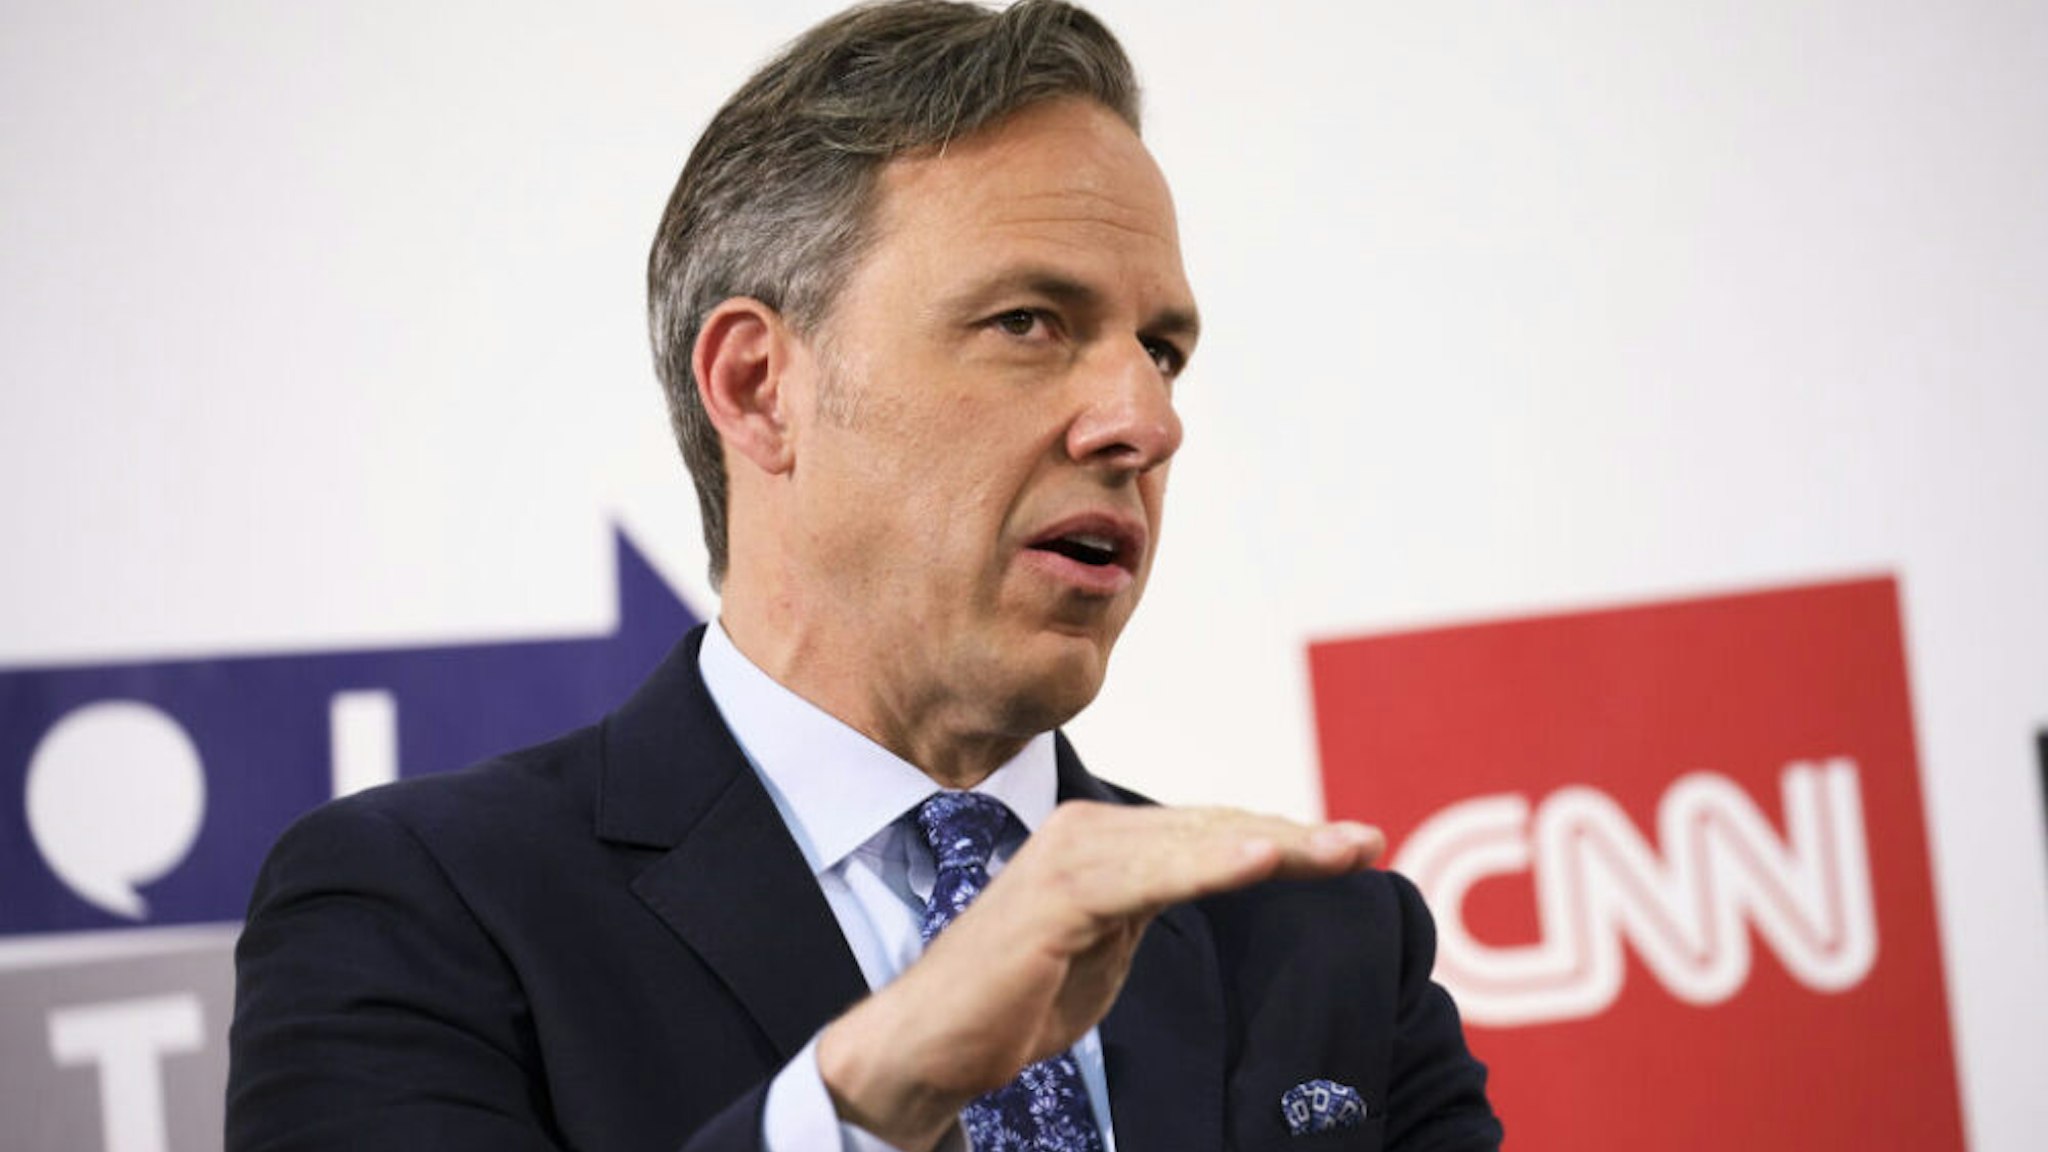 Jake Tapper, chief Washington correspondent for CNN, speaks with comedian Chelsea Handler, not pictured, during the Politicon convention inside the Pasadena Convention Center in Pasadena, California, U.S., on Saturday, July 29, 2017. During the third annual Politicon pundits, politicians, comedians and entertainers gather to discuss issues that touch all sides of the political spectrum.